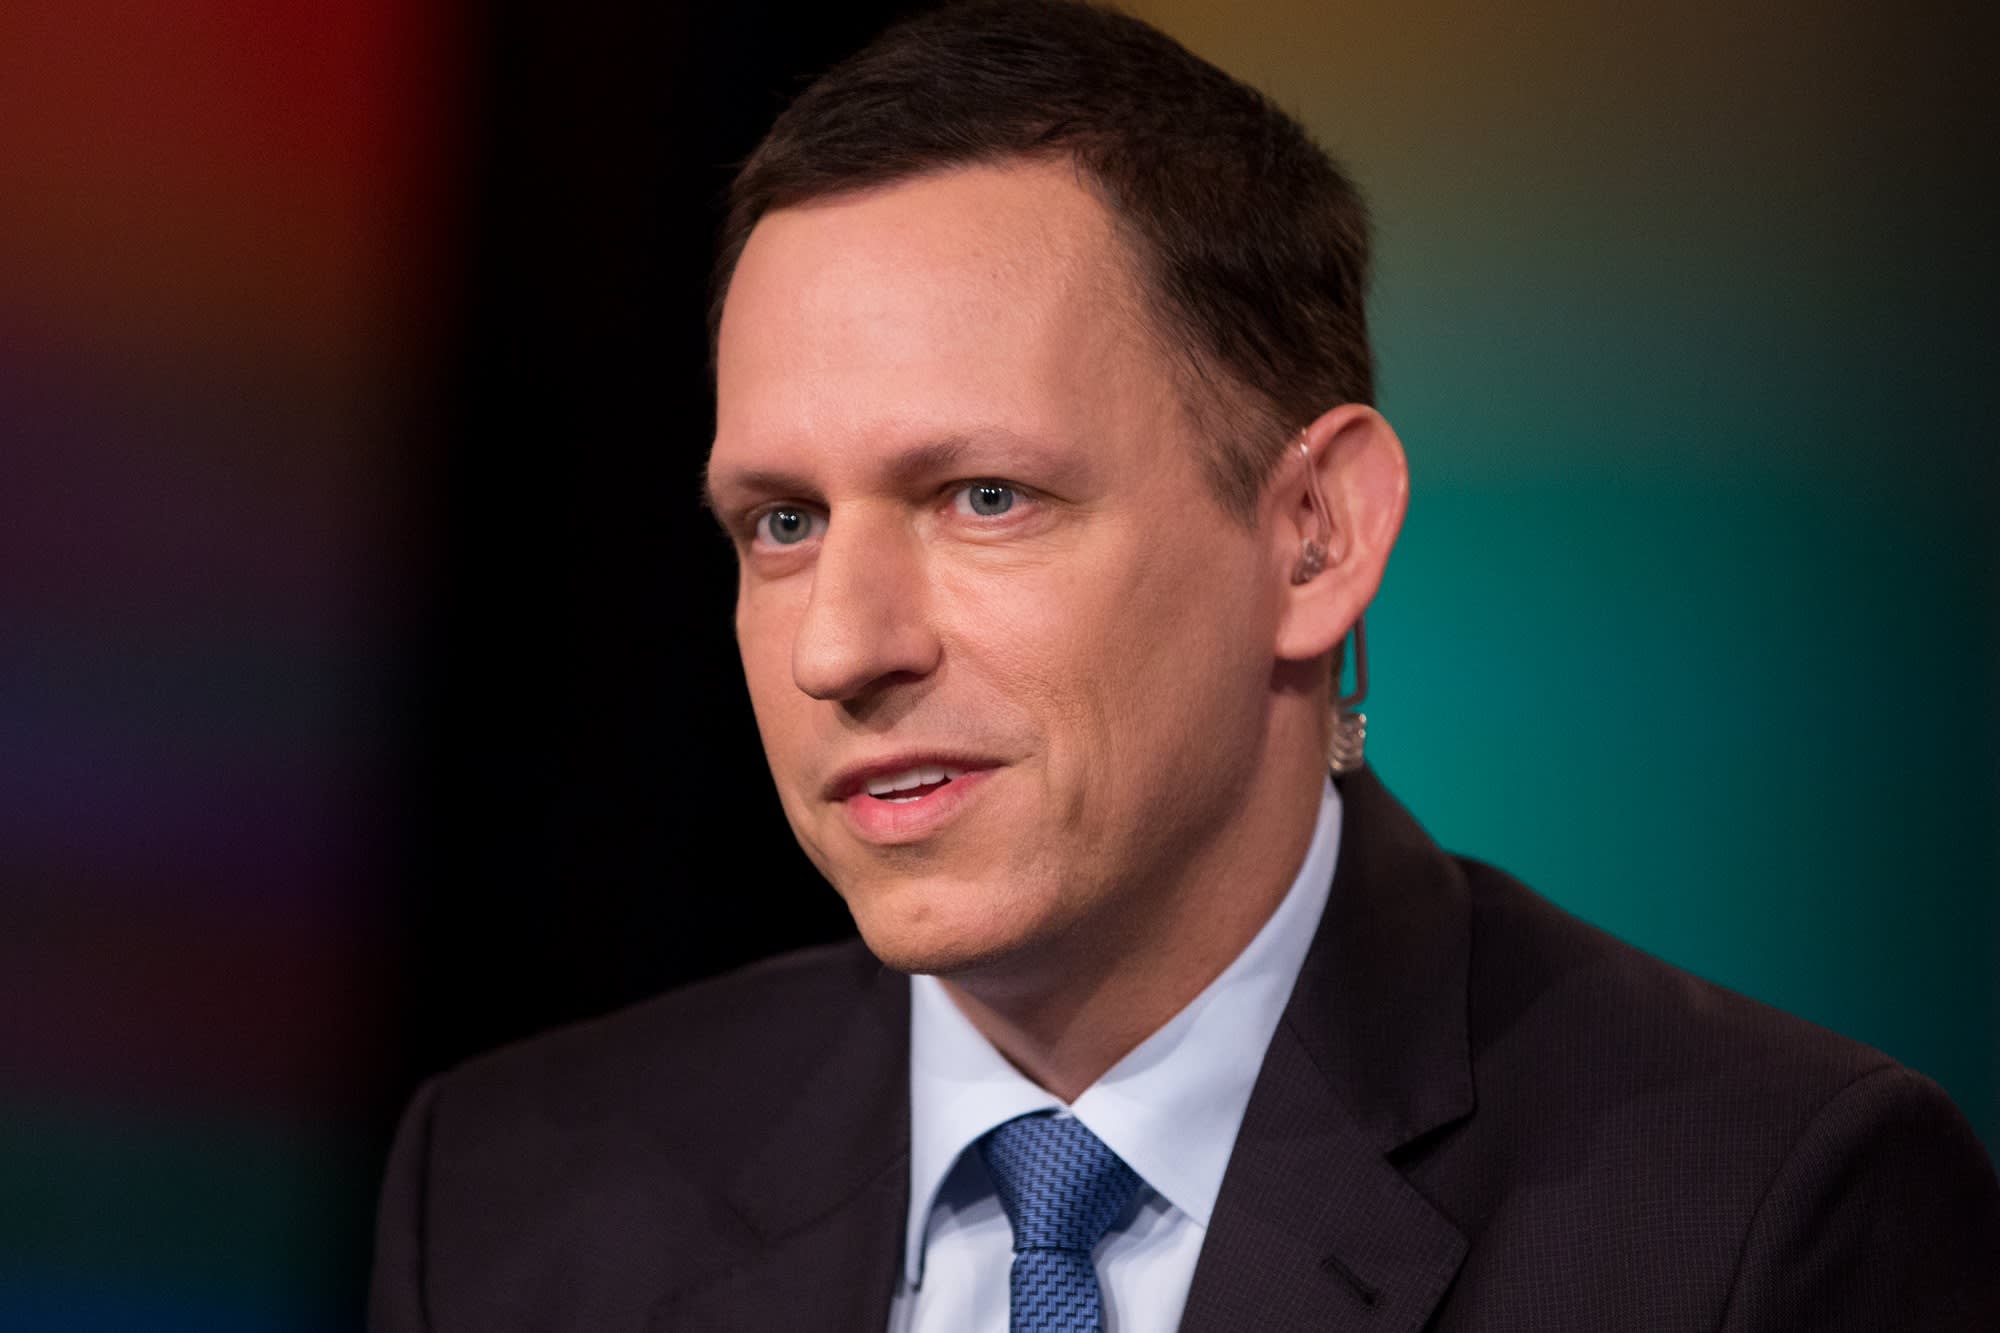 Peter Thiel to step down from Facebook board